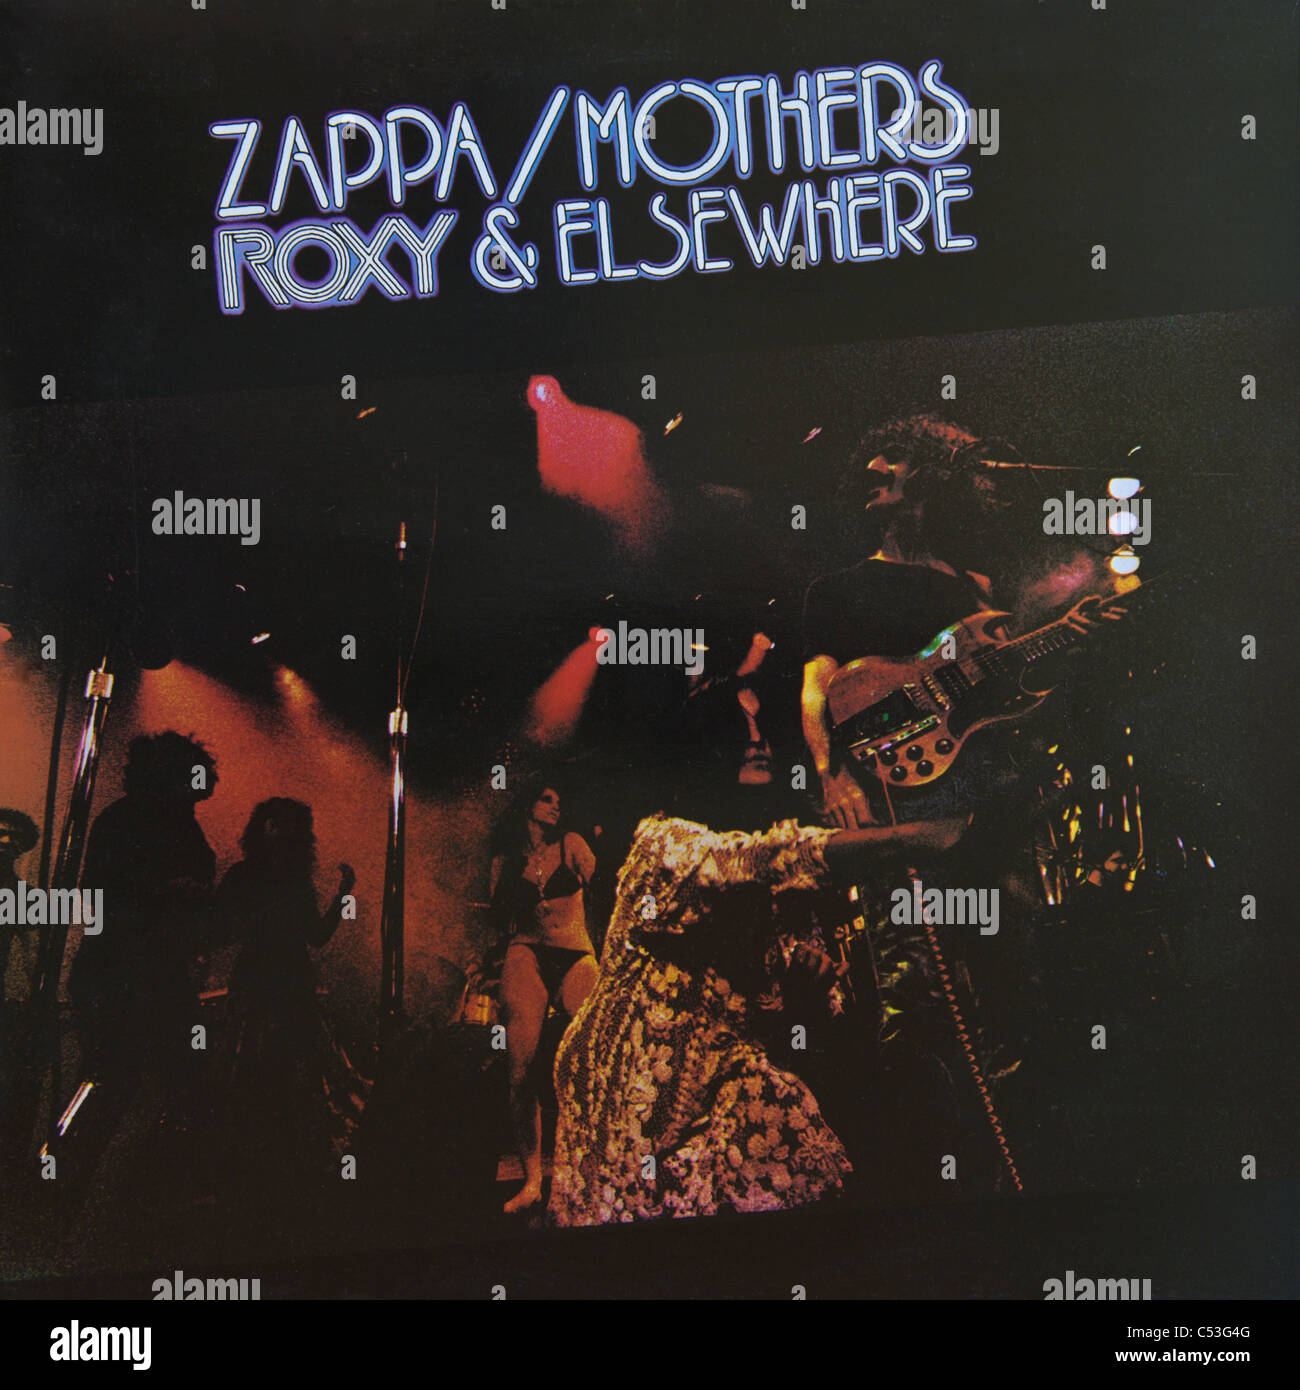 Cover of original vinyl album Roxy & Elsewhere by Frank Zappa And The Mothers released 1974 on Discreet Records Stock Photo